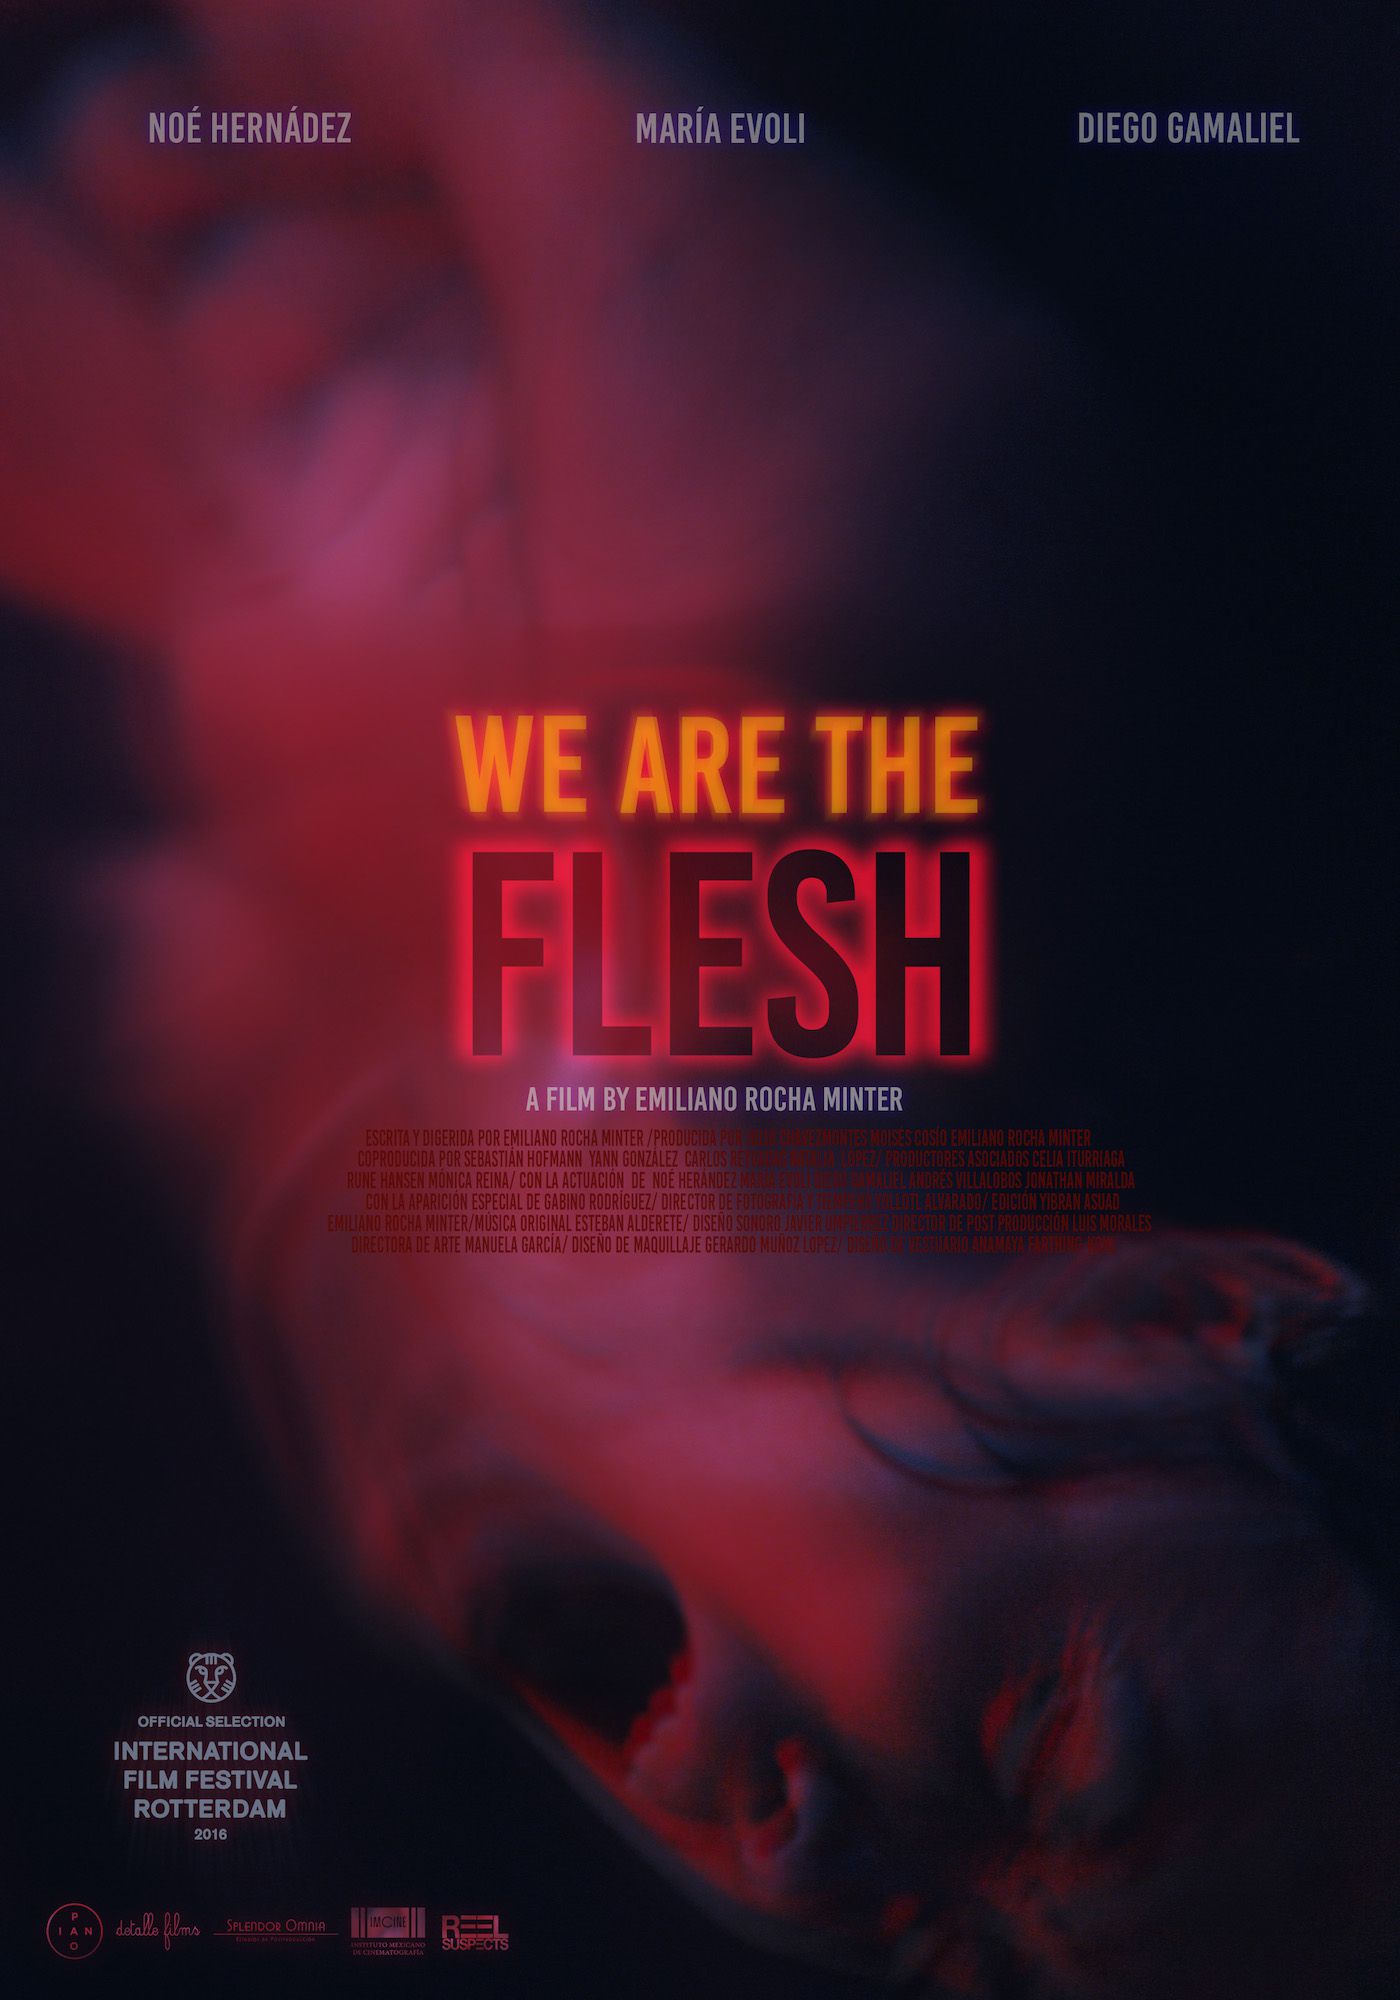 We are the Flesh - Film (2016) streaming VF gratuit complet